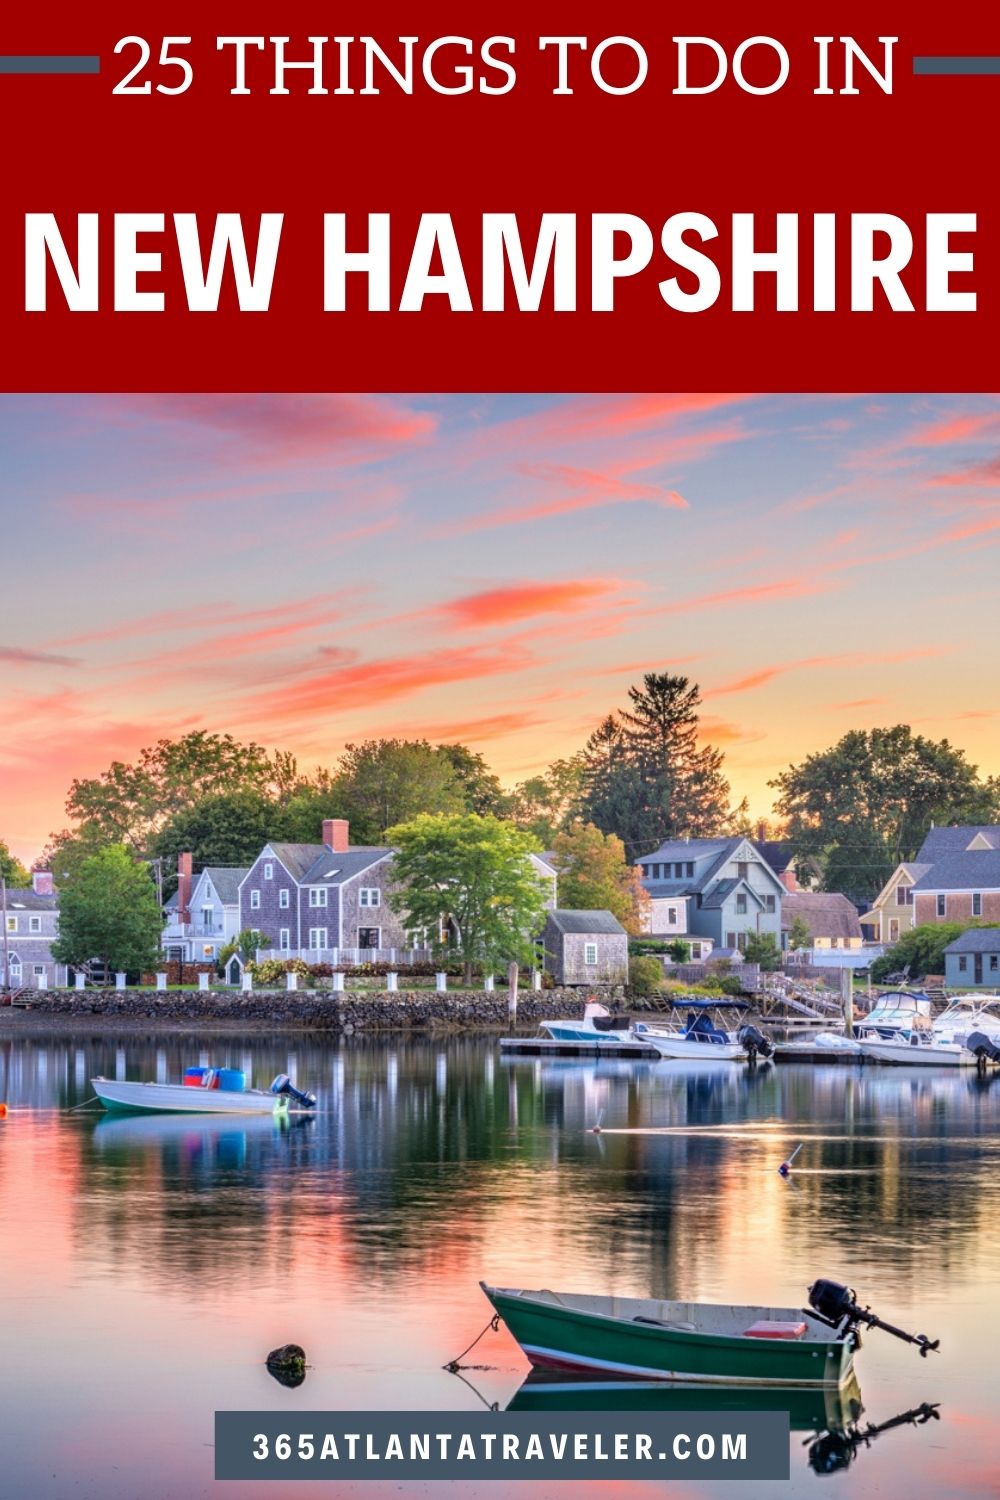 25 Best Things To Do in New Hampshire You’ll Love